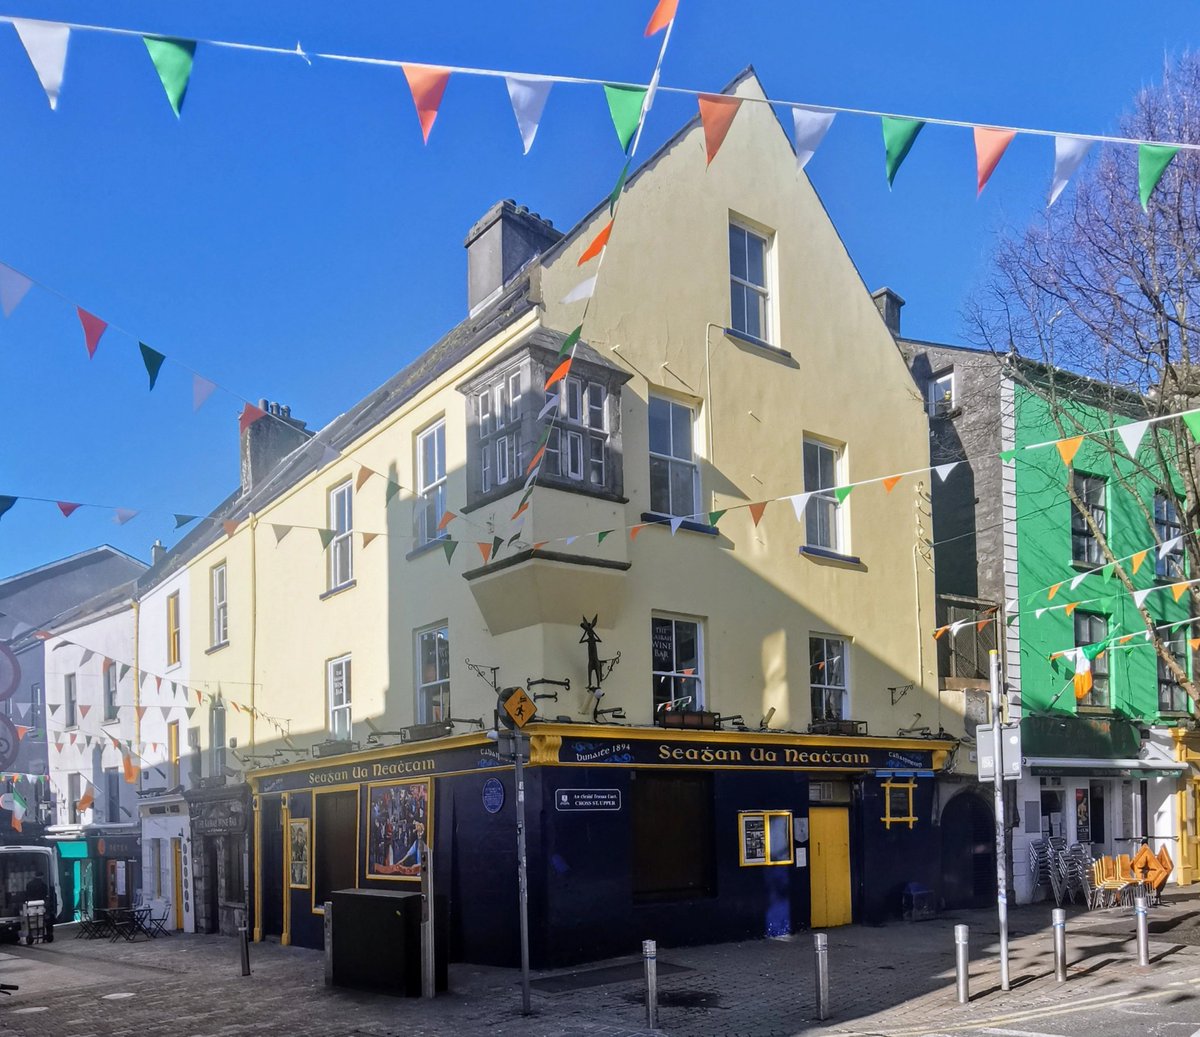 Town House of Richard Martin (1754 - 1834) of #Galway. Known as 'Humanity Dick'. Was a Politician, Landlord, Animal Rights Activist & Theater Founder. #history #heritage #culture #tourism #BrendanJHynes Info: Galway Civic Trust & Naughtons Bar. brendanjhynes.com